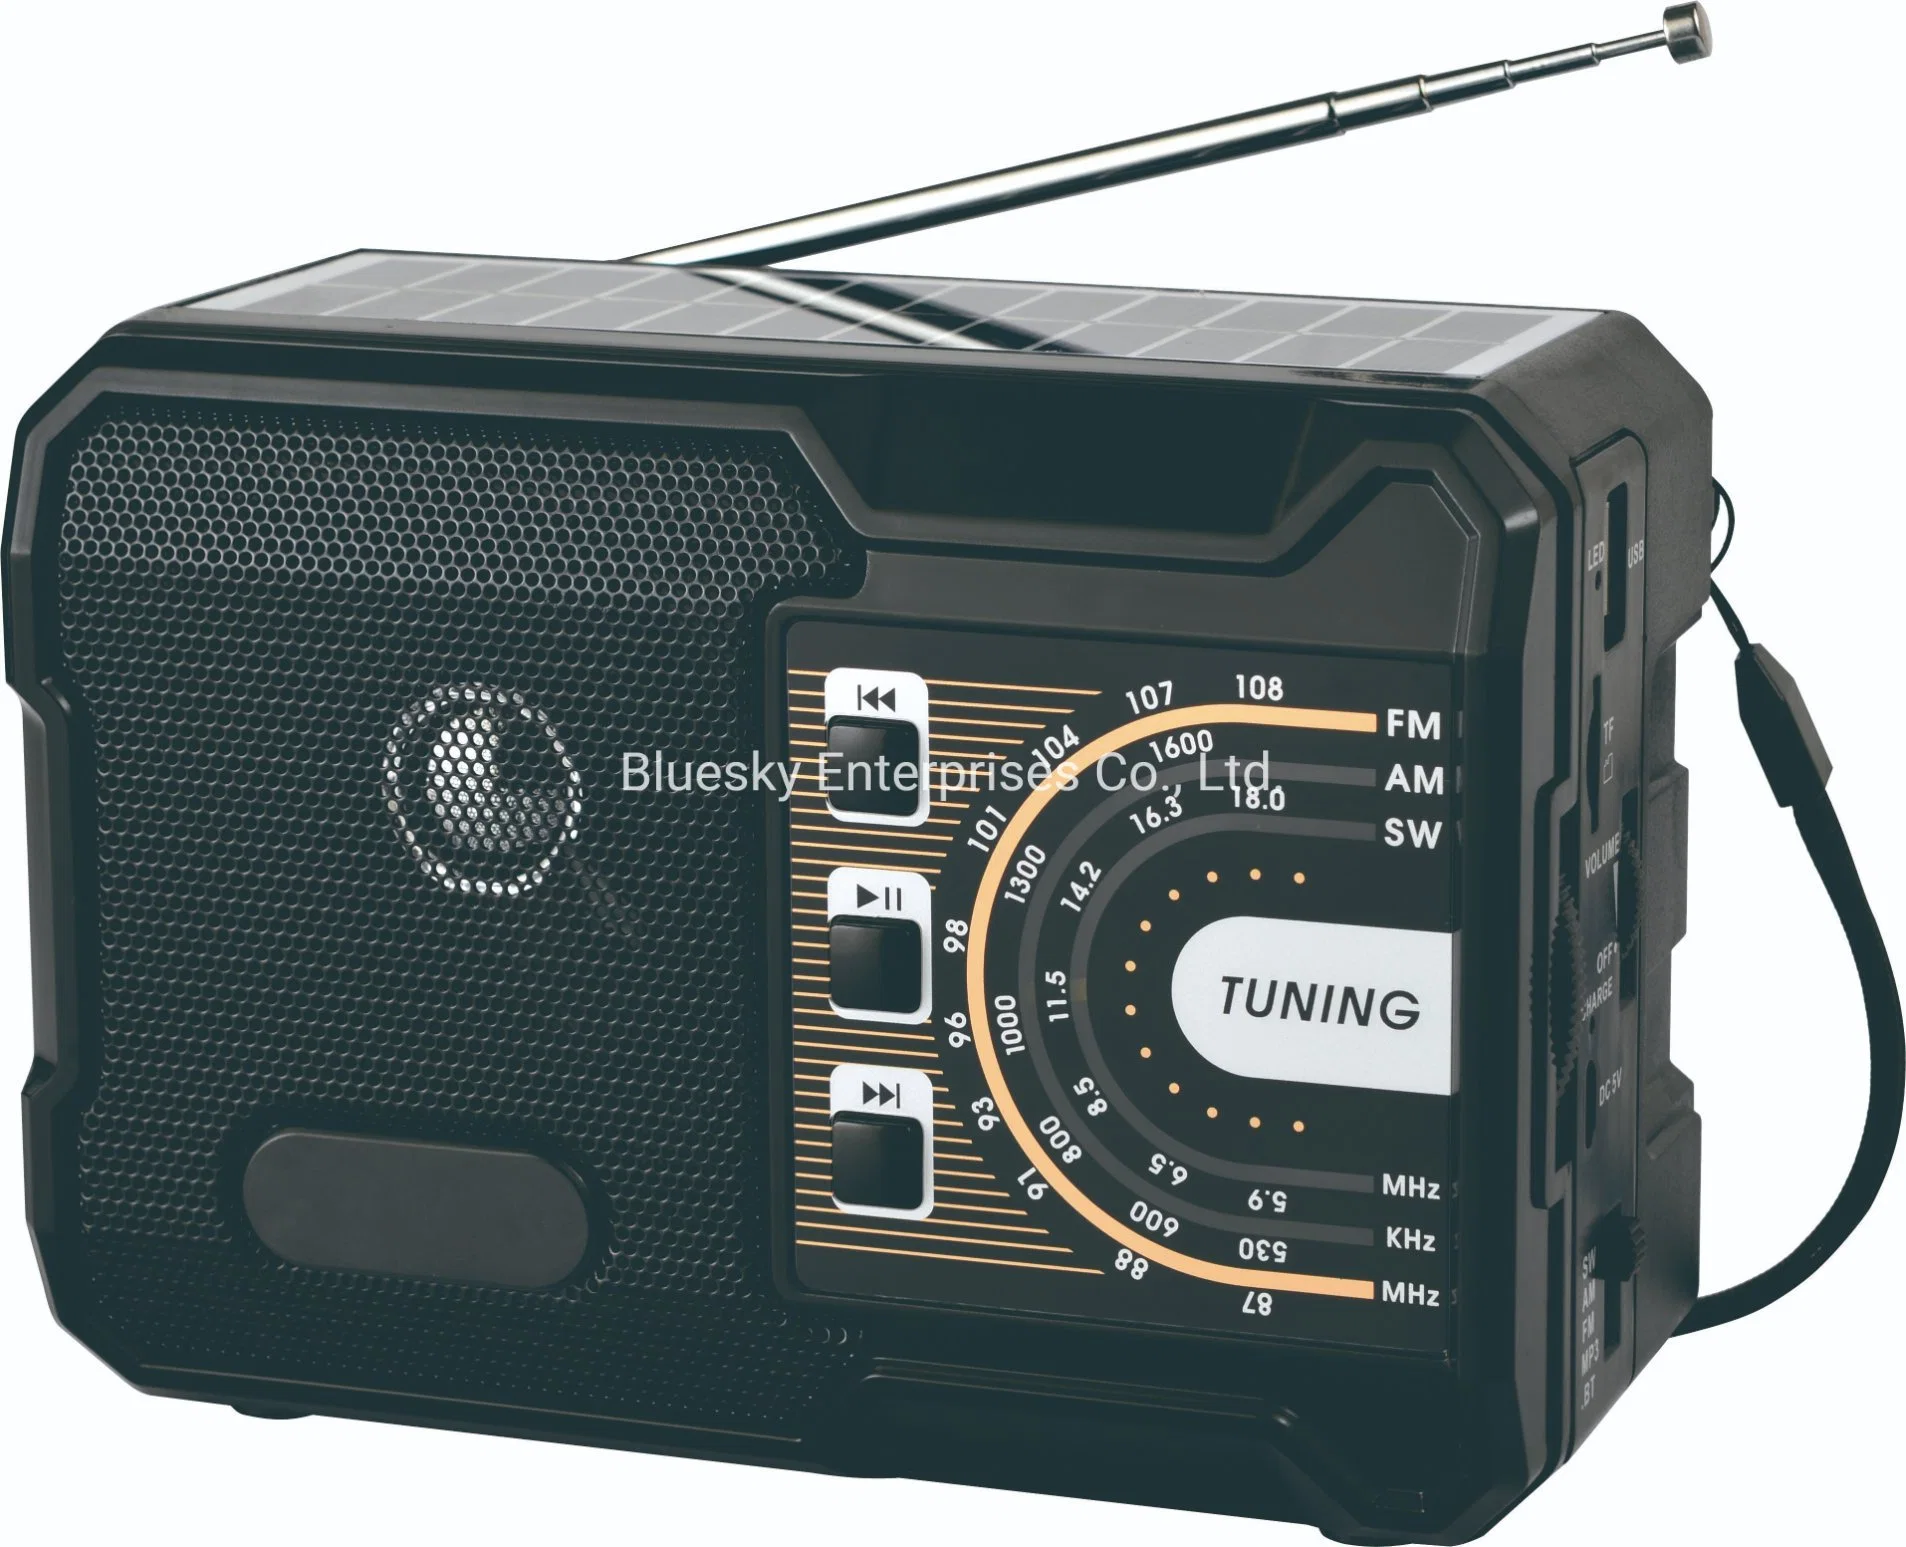 Tw K5bts FM Am Sw 3 Band Rechargeable Battery Radio Support Bluetooth, USB, TF Card, MP3 Player Portable Radio with Solar Panel